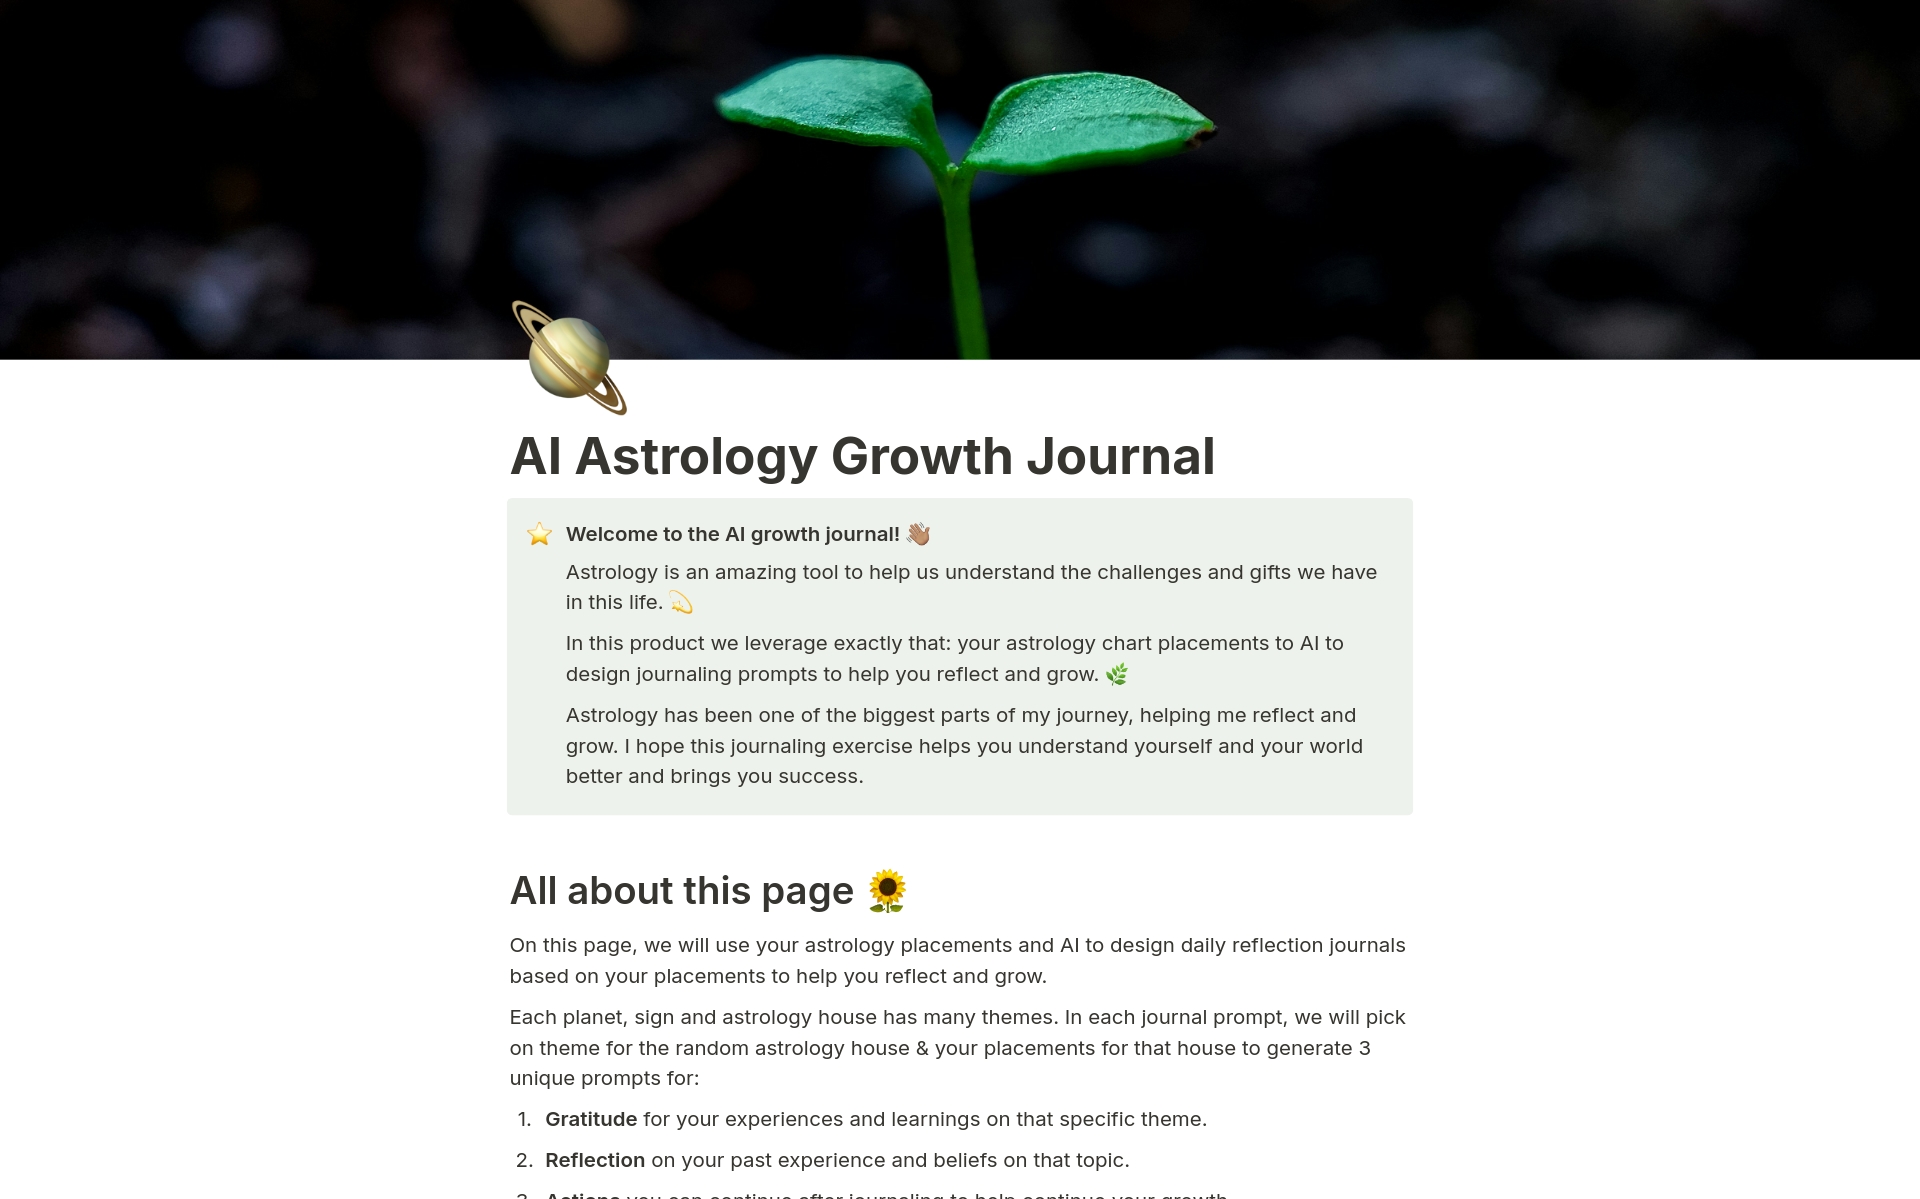 Astrology is an amazing tool for helping us understand the challenges and gifts we have in this life. This makes it the perfect tool for journaling, personal growth, and reflection. Using your chart, create daily AI gratitude, reflectio and action prompts for your mindset growth.